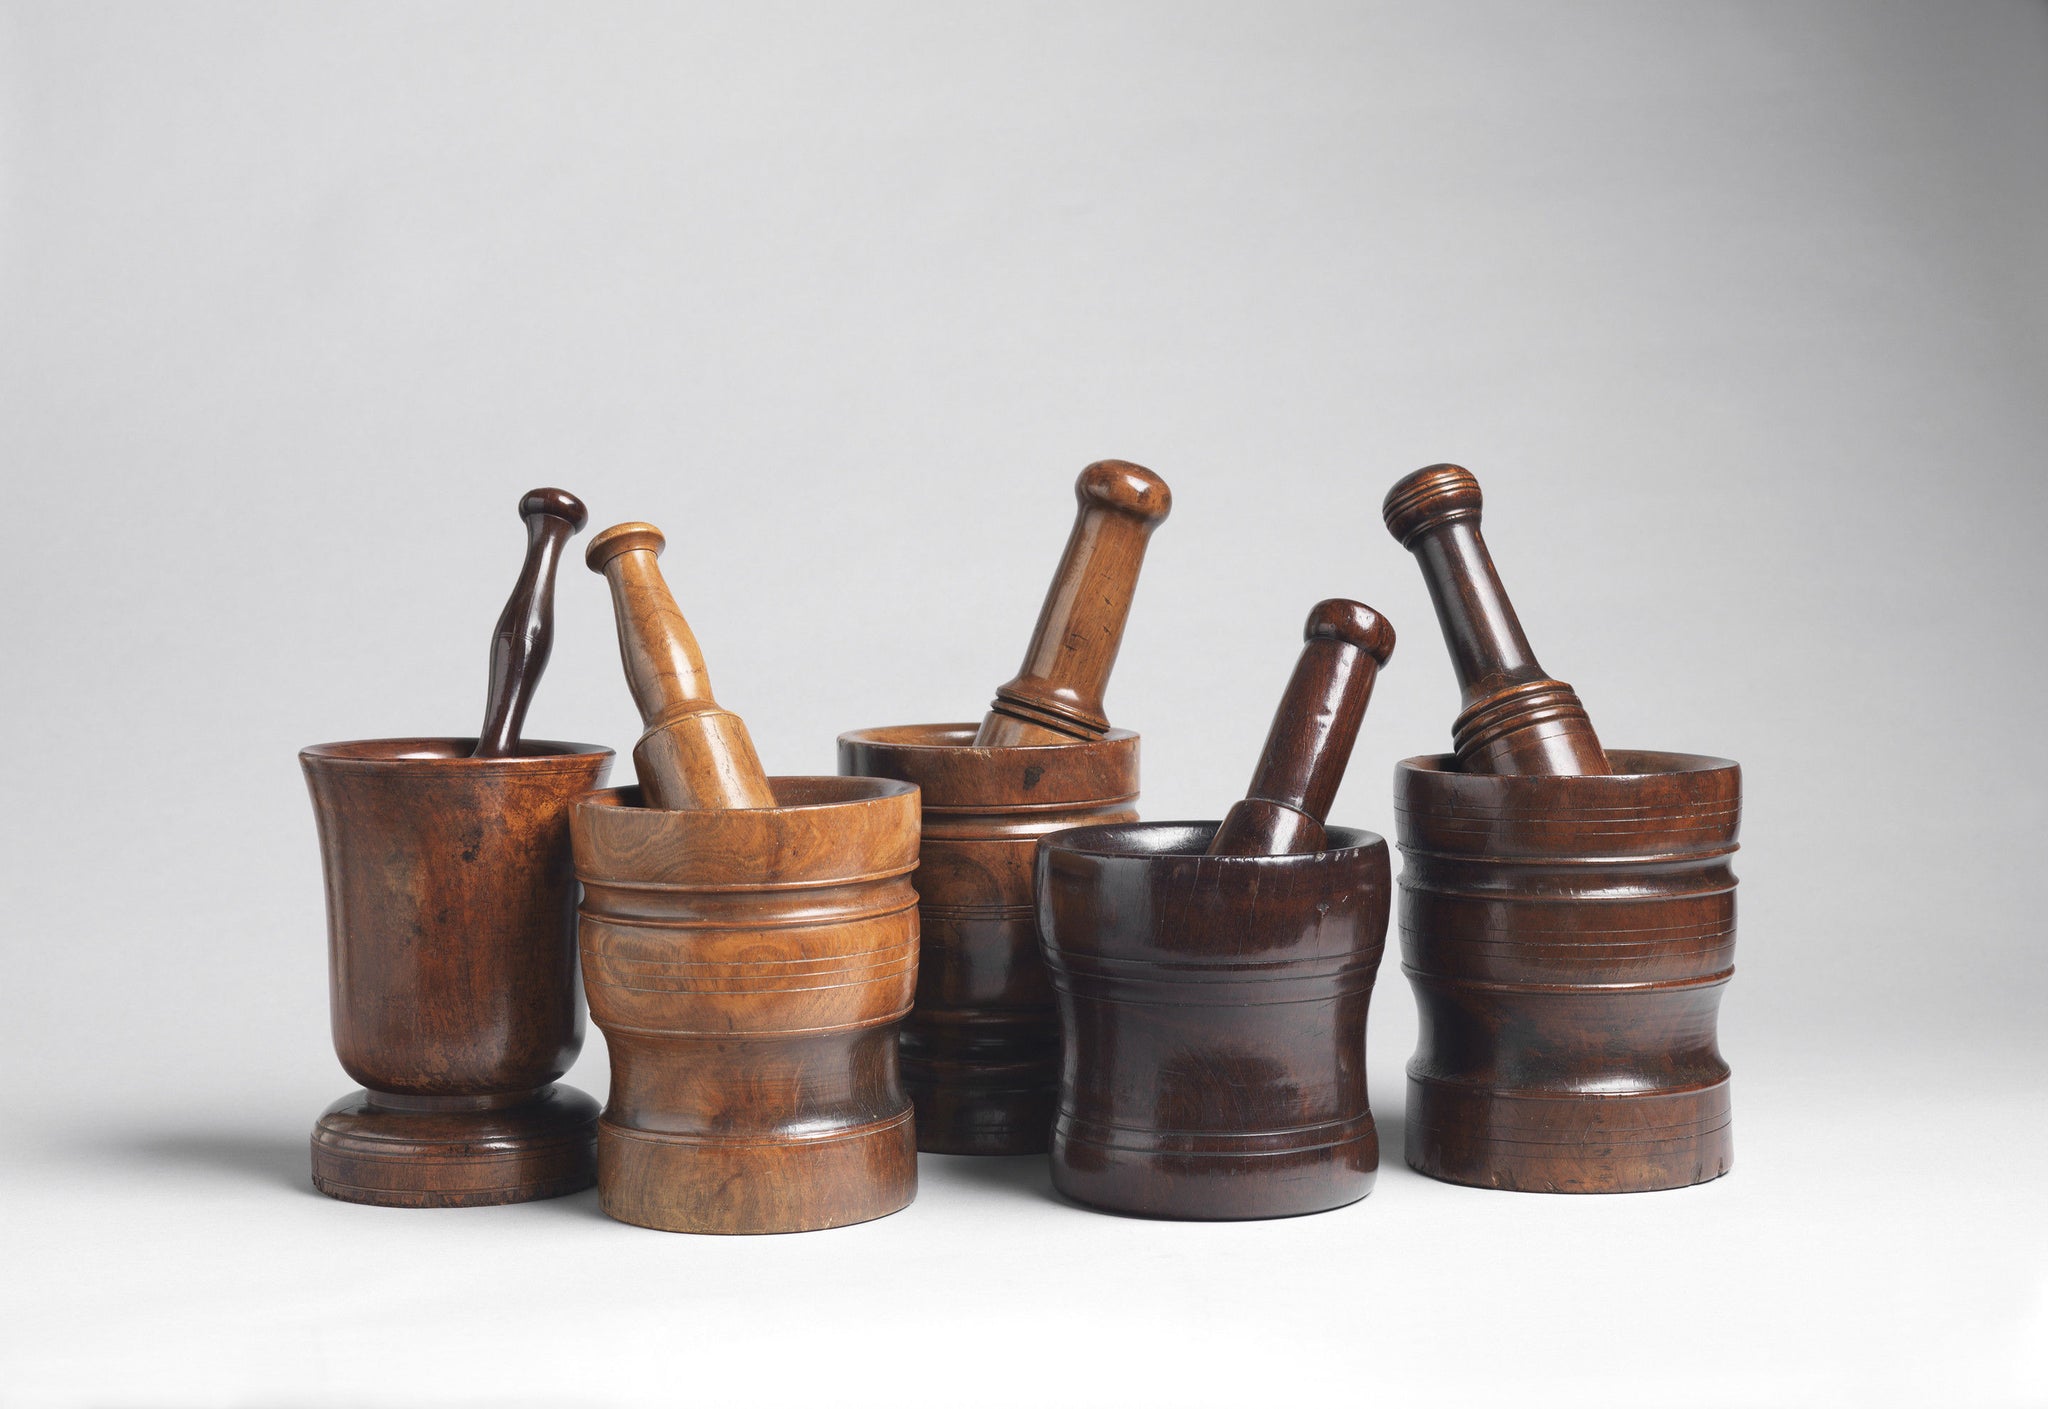 A Fine Collection of Fine Early Mortars and Pestles